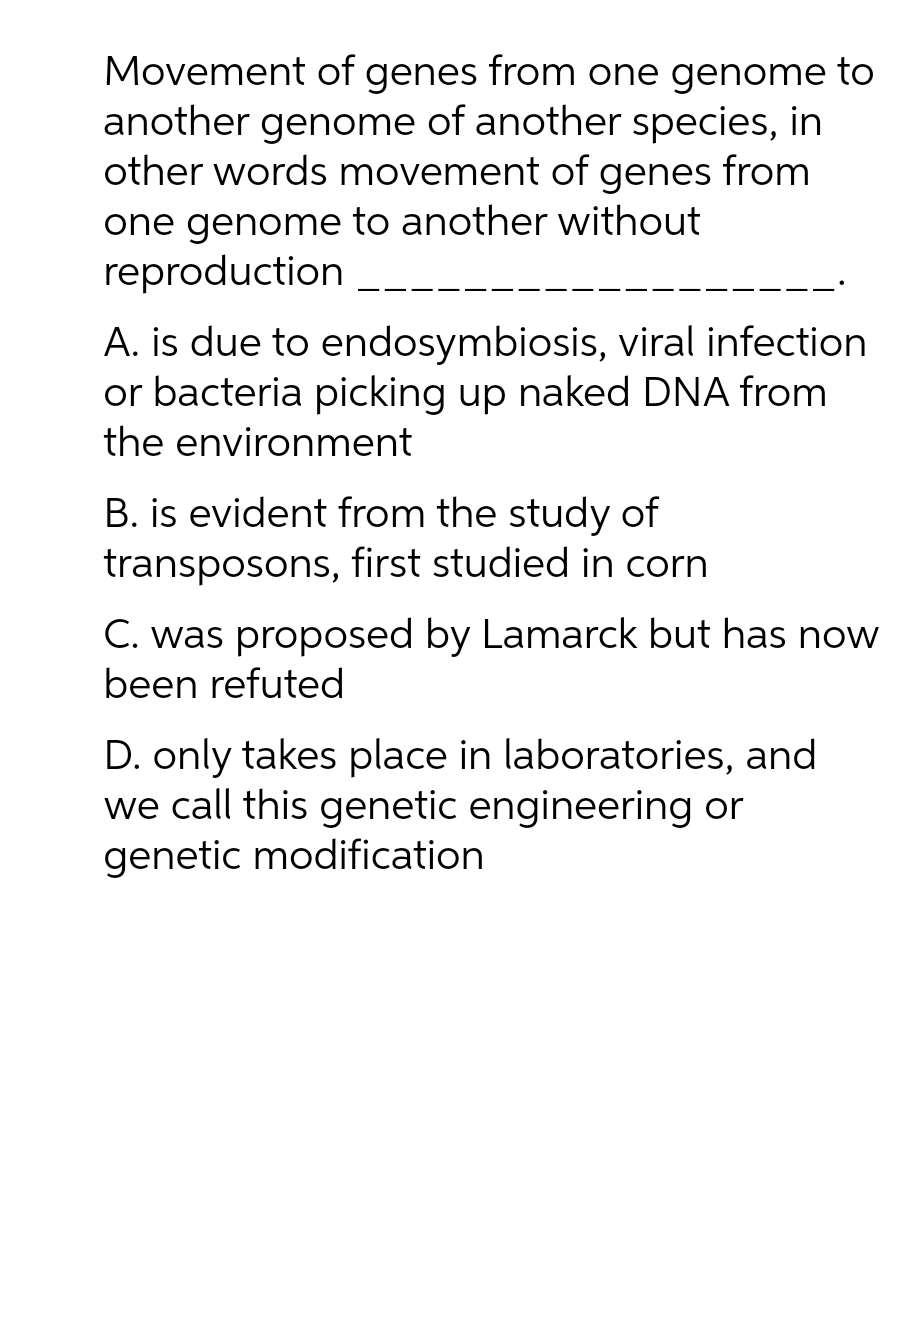 Movement of genes from one genome to
another genome of another species, in
other words movement of genes from
one genome to another without
reproduction
A. is due to endosymbiosis, viral infection
or bacteria picking up naked DNA from
the environment
B. is evident from the study of
transposons, first studied in corn
C. was proposed by Lamarck but has now
been refuted
D. only takes place in laboratories, and
we call this genetic engineering or
genetic modification